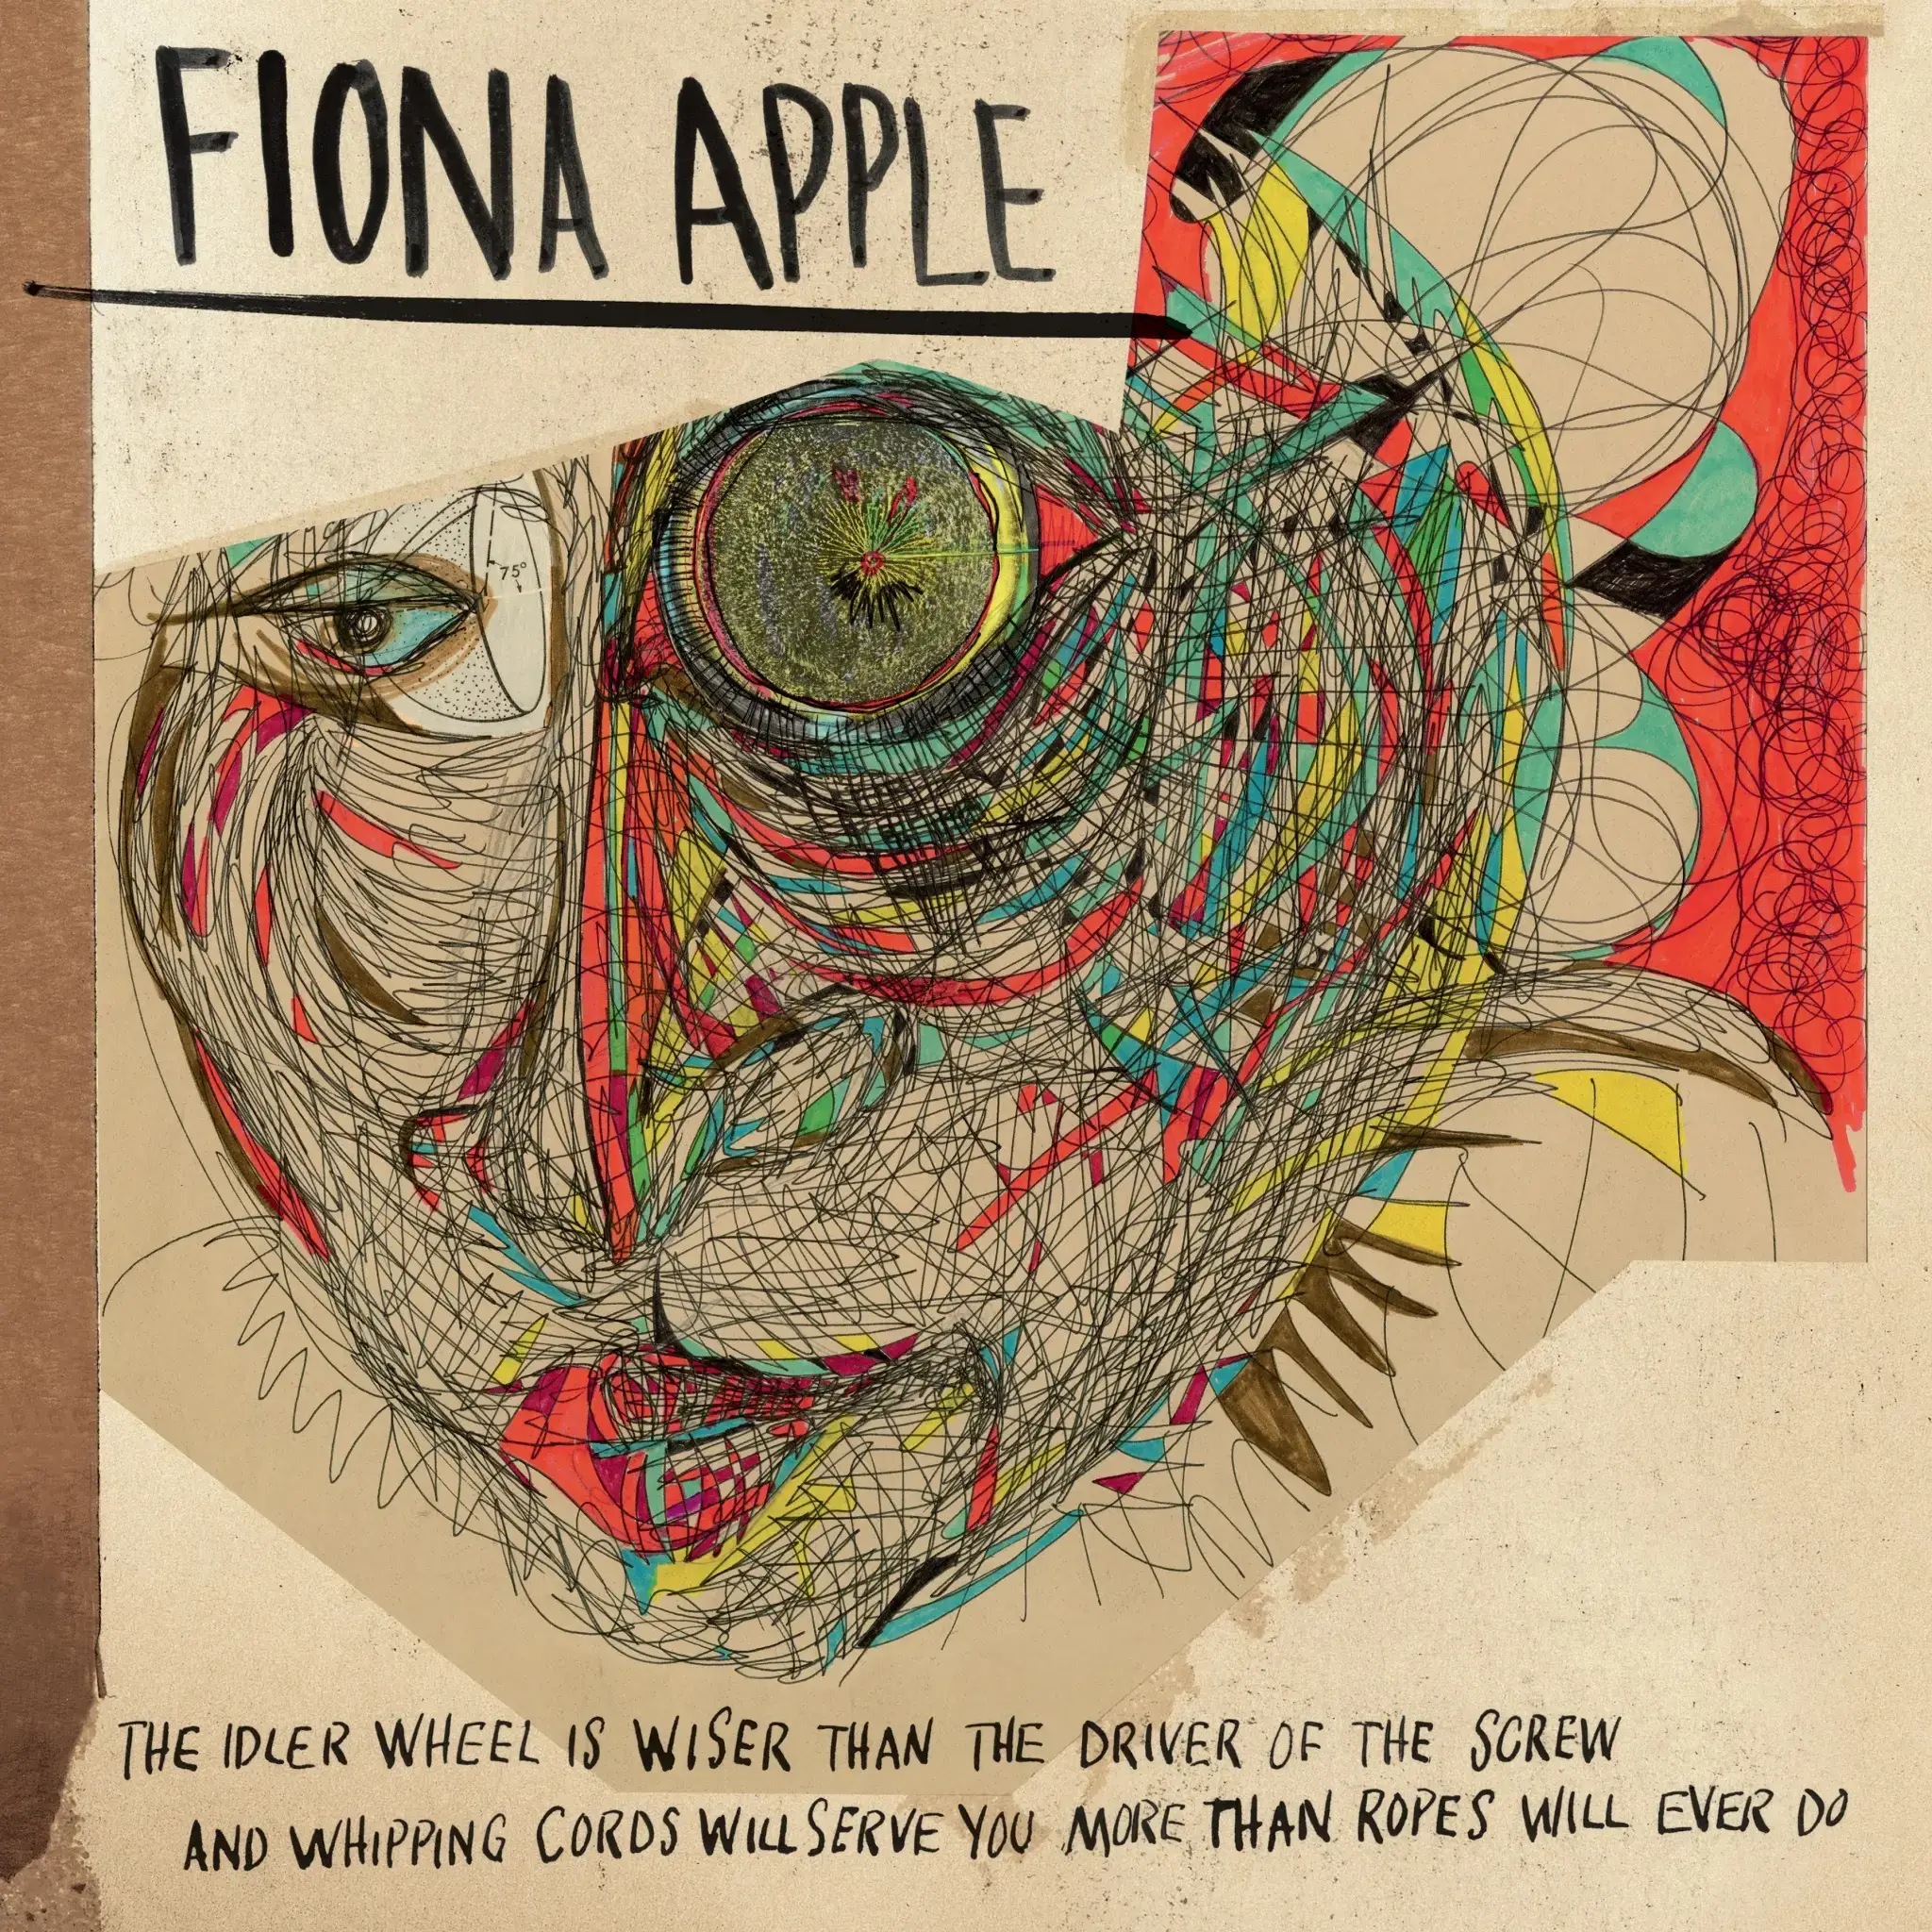 <strong>Fiona Apple - The Idler Wheel Is Wiser Than The Driver Of The Screw and Whipping Cords Will Serve You More Than Ropes Will Ever Do</strong> (Vinyl LP - black)